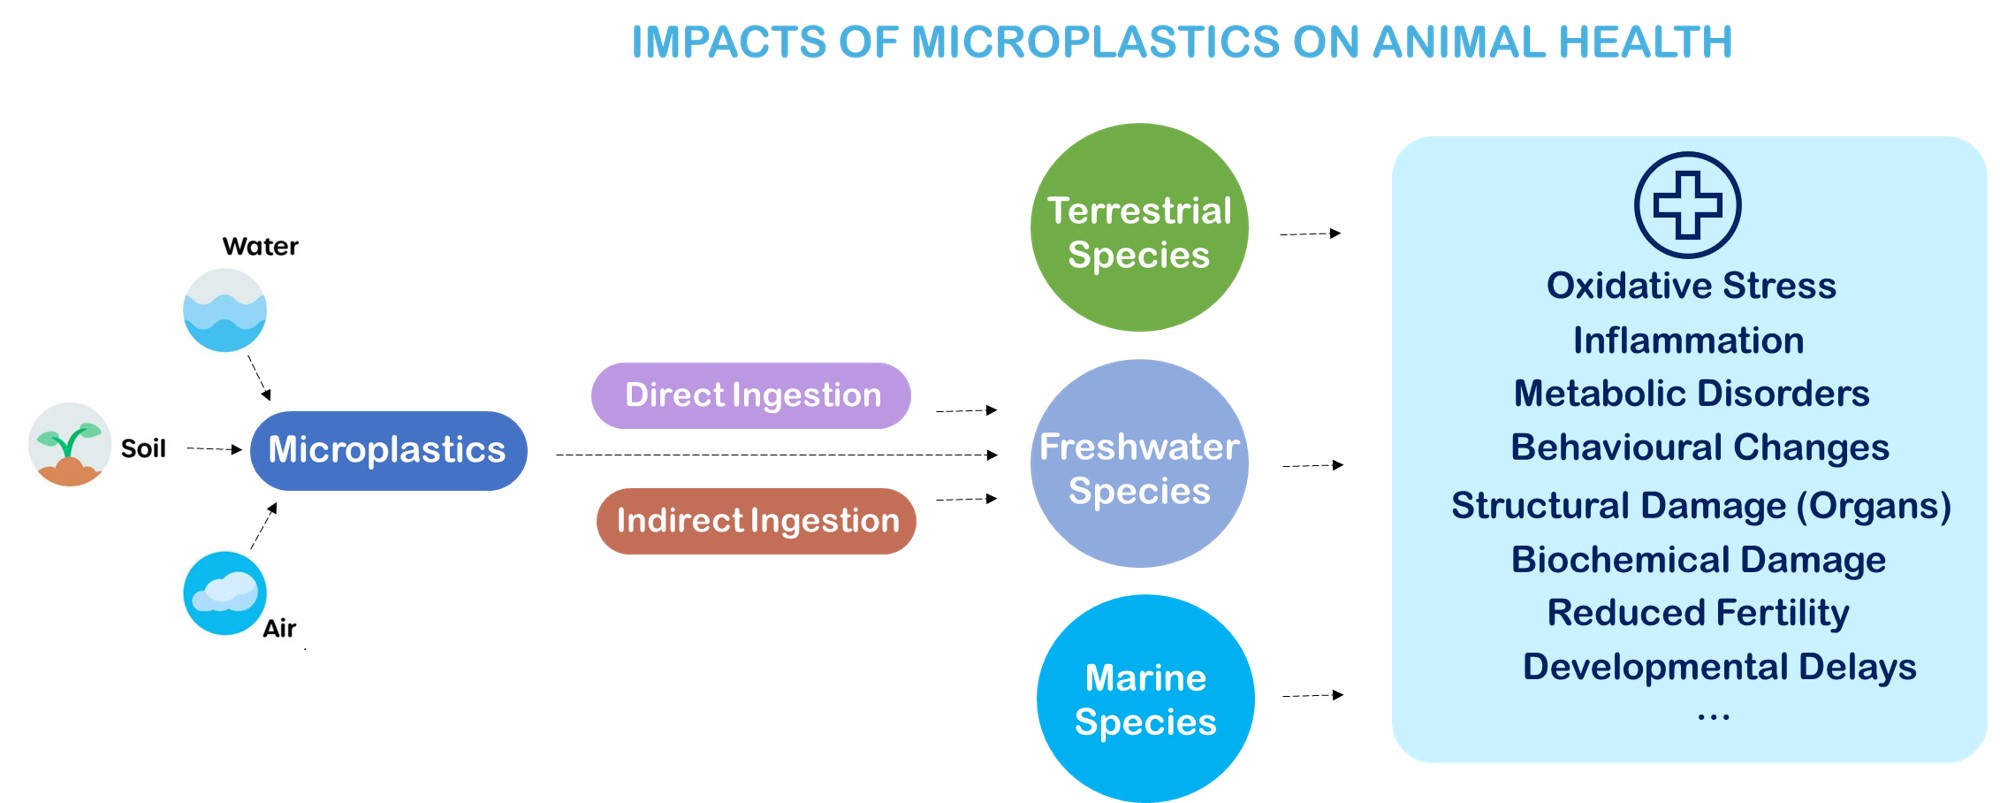 Overview of microplastic pathways, uptake, and impacts on terrestrial and aquatic species. © Wasser 3.0.